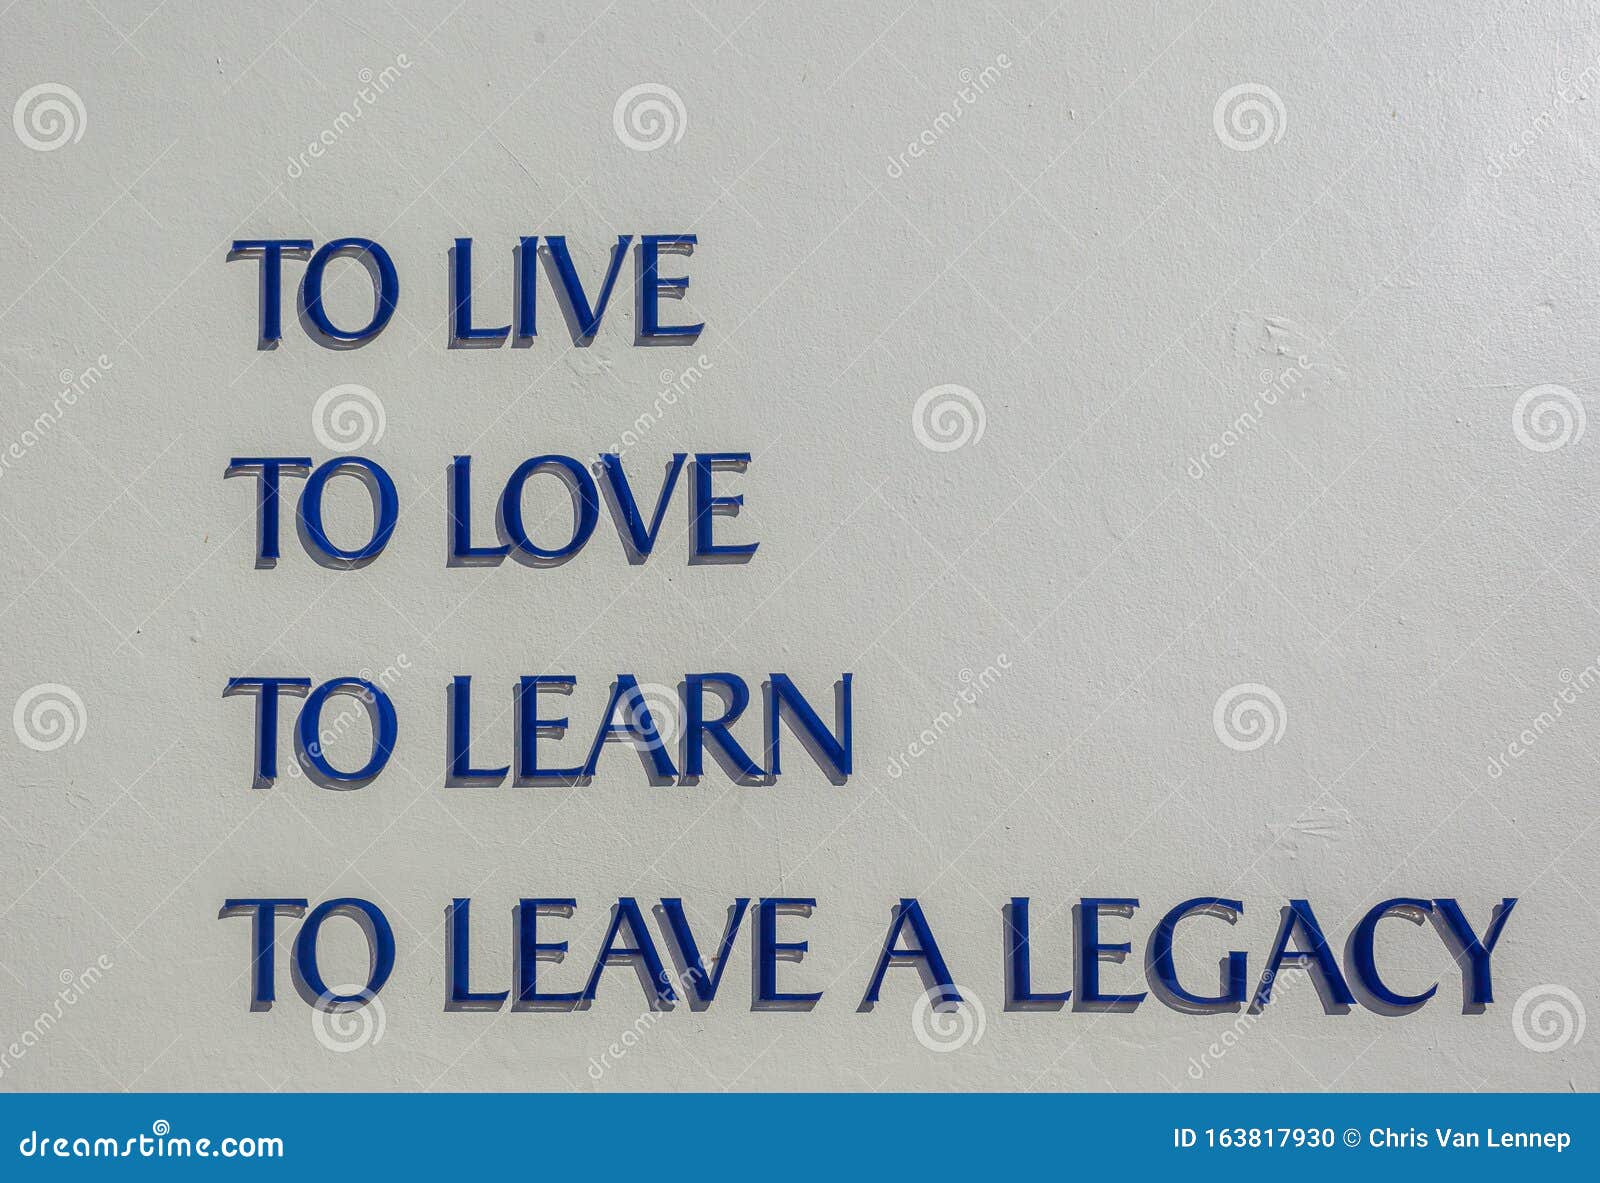 wall signs words to live love learn legacy outdoors